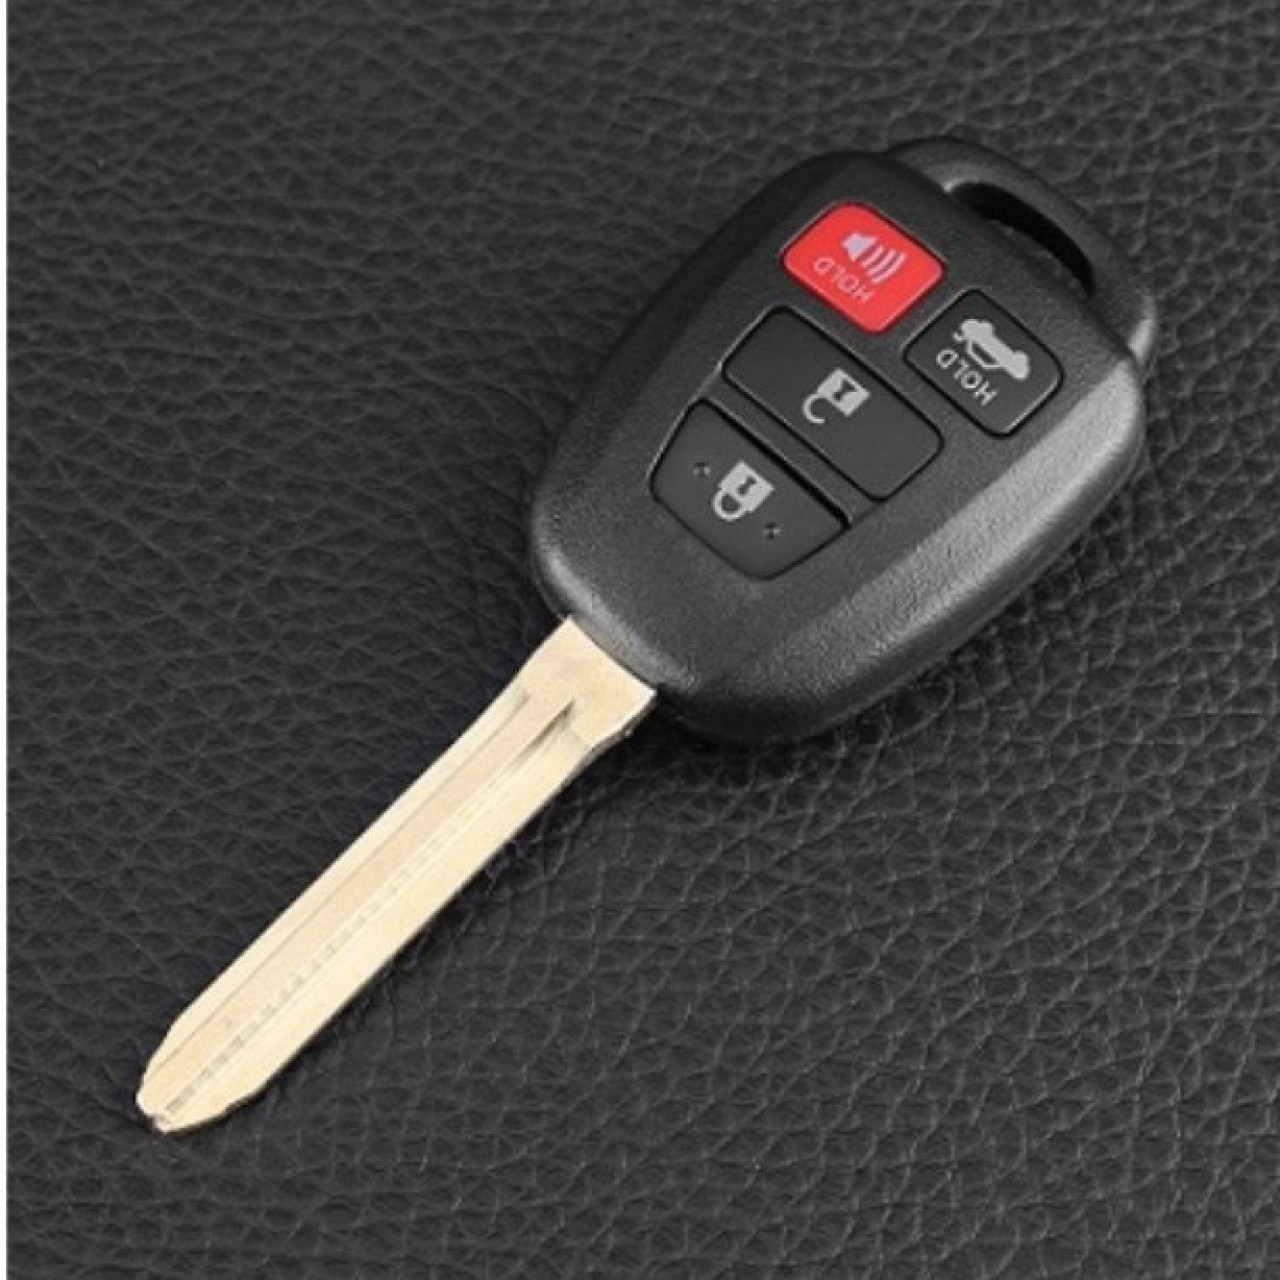 4 Buttons Remote Car Key Shell Case Fob